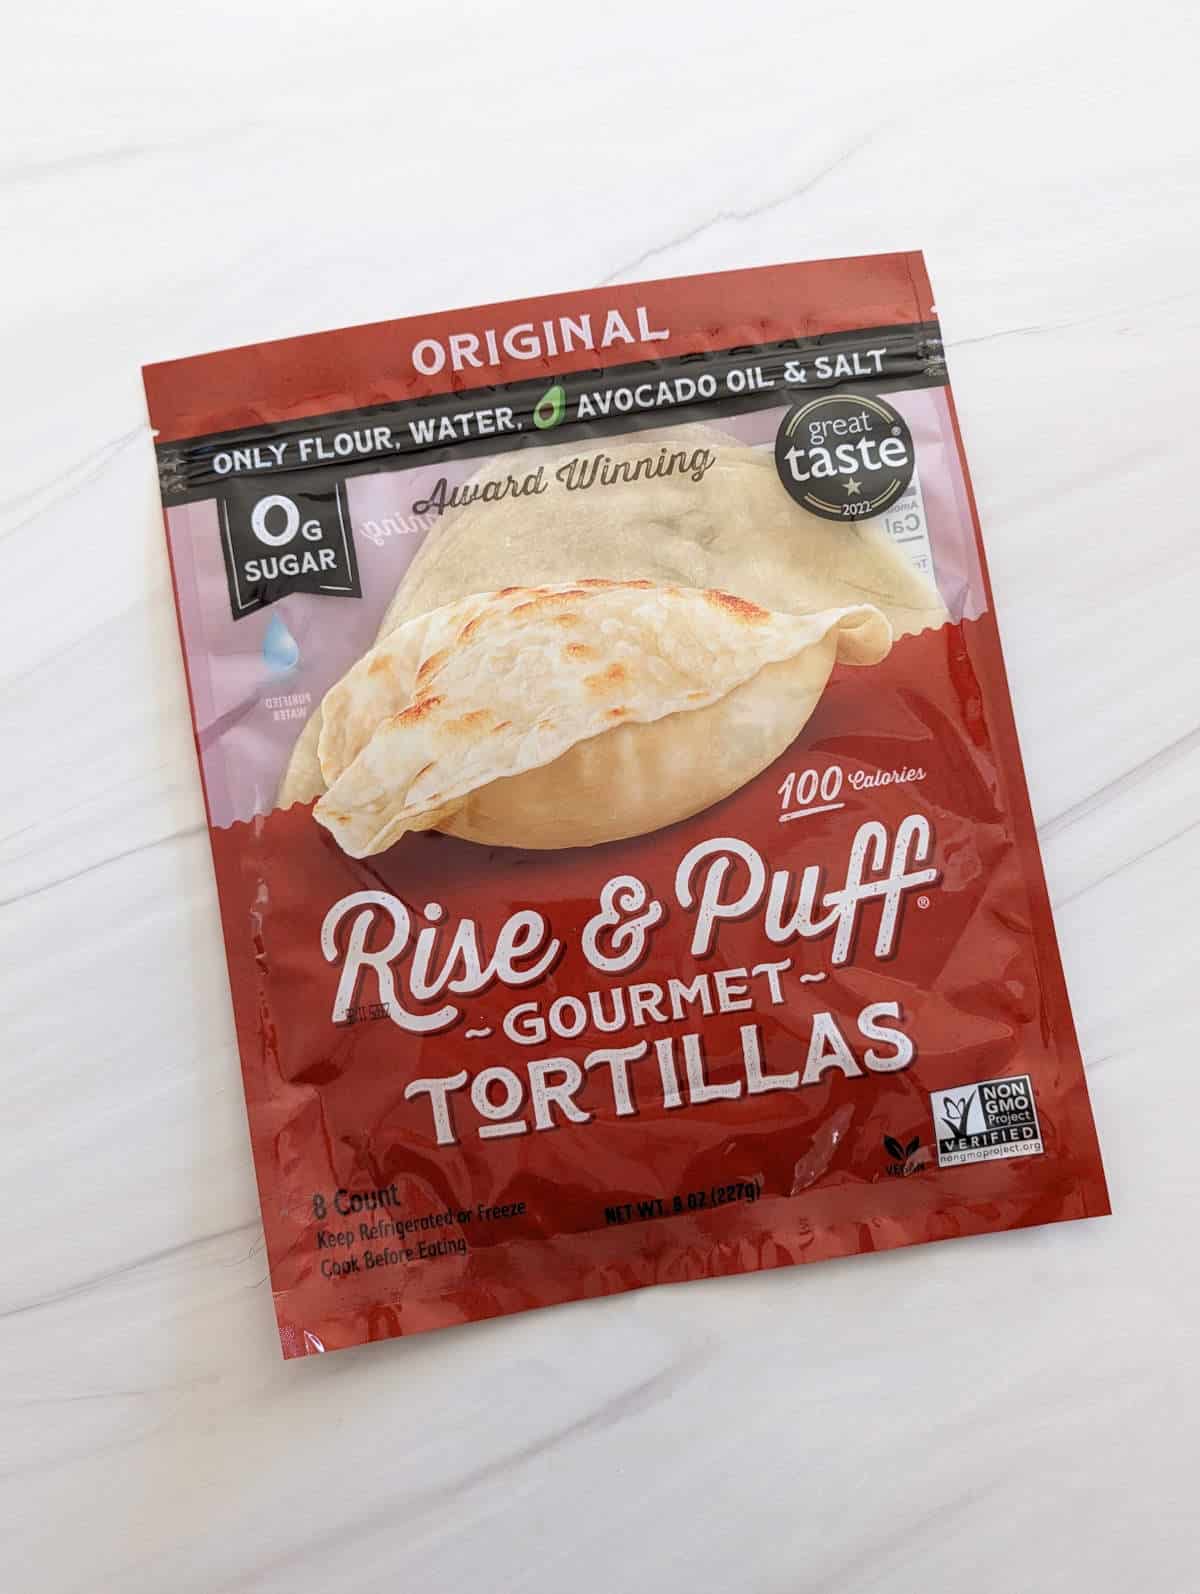 Rise and Puff tortilla packaging on a light background.